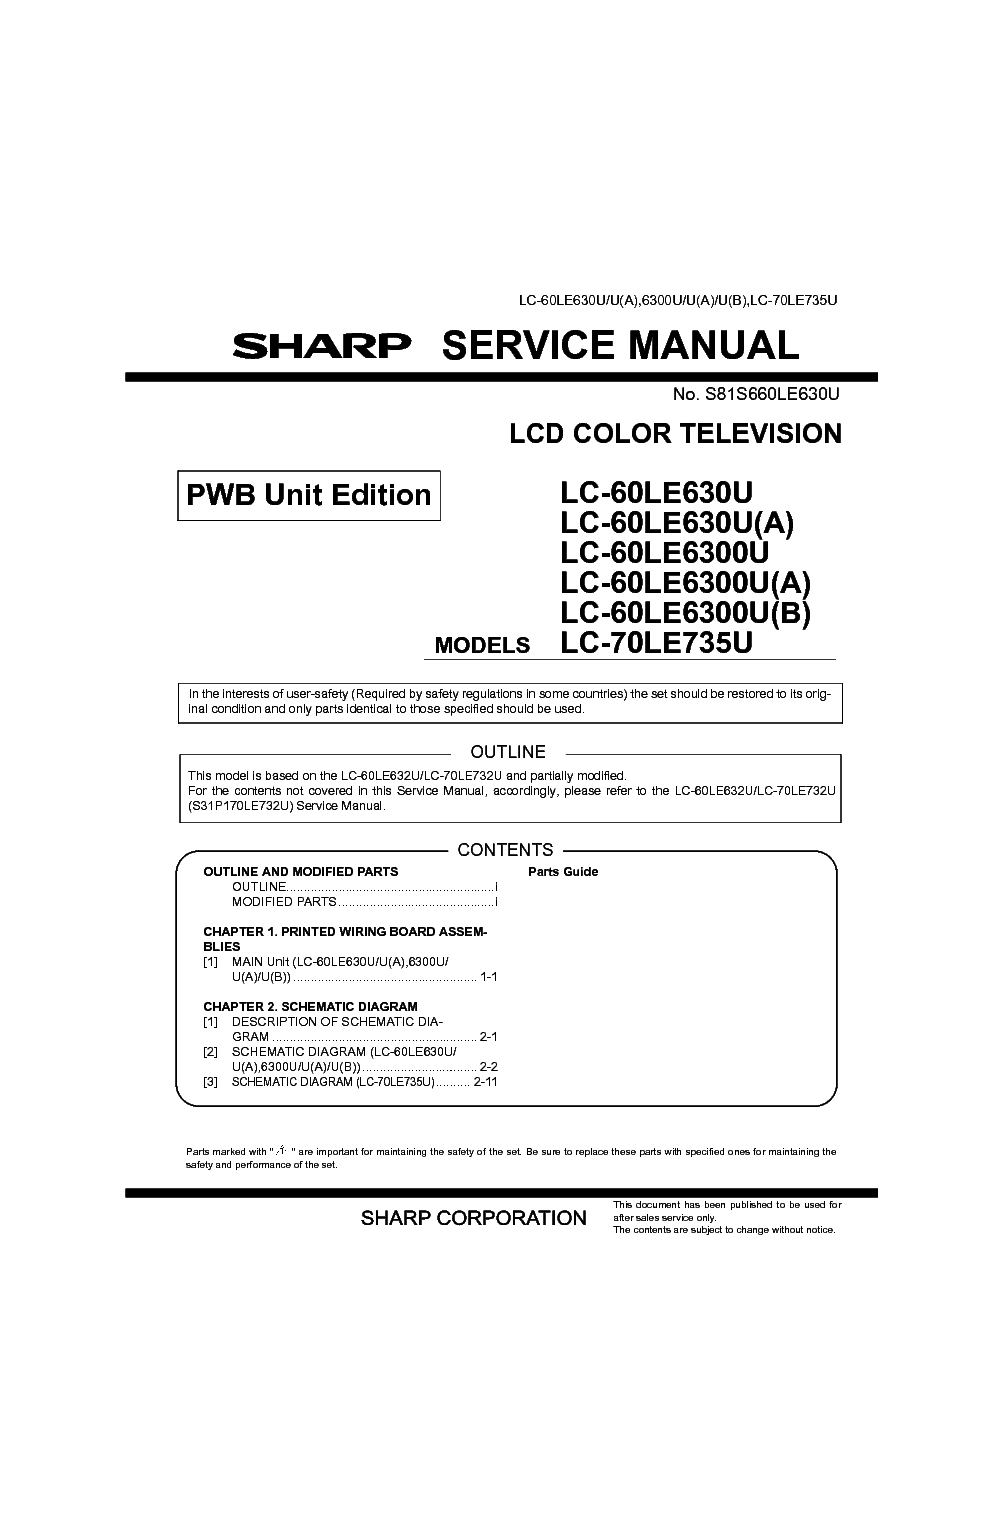 SHARP LC-60LE630U-A LC-60LE6300U-A-B LC-70LE735U PWB UNIT EDITION service manual (1st page)